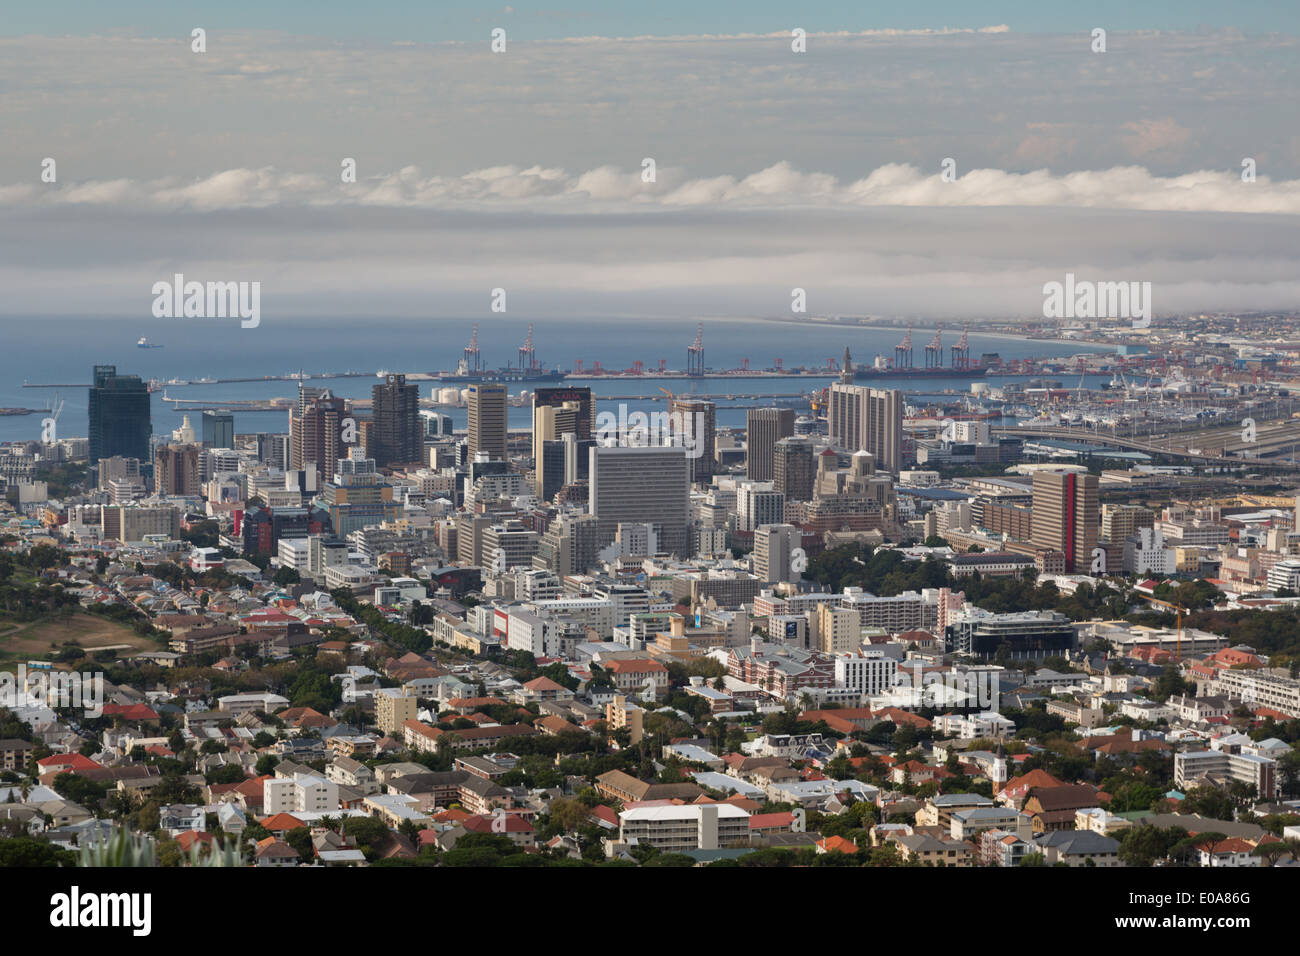 Cape Town South Africa seen from the slopes of Signal Hill. The curve of the bay disappears into an approaching weather front. Stock Photo